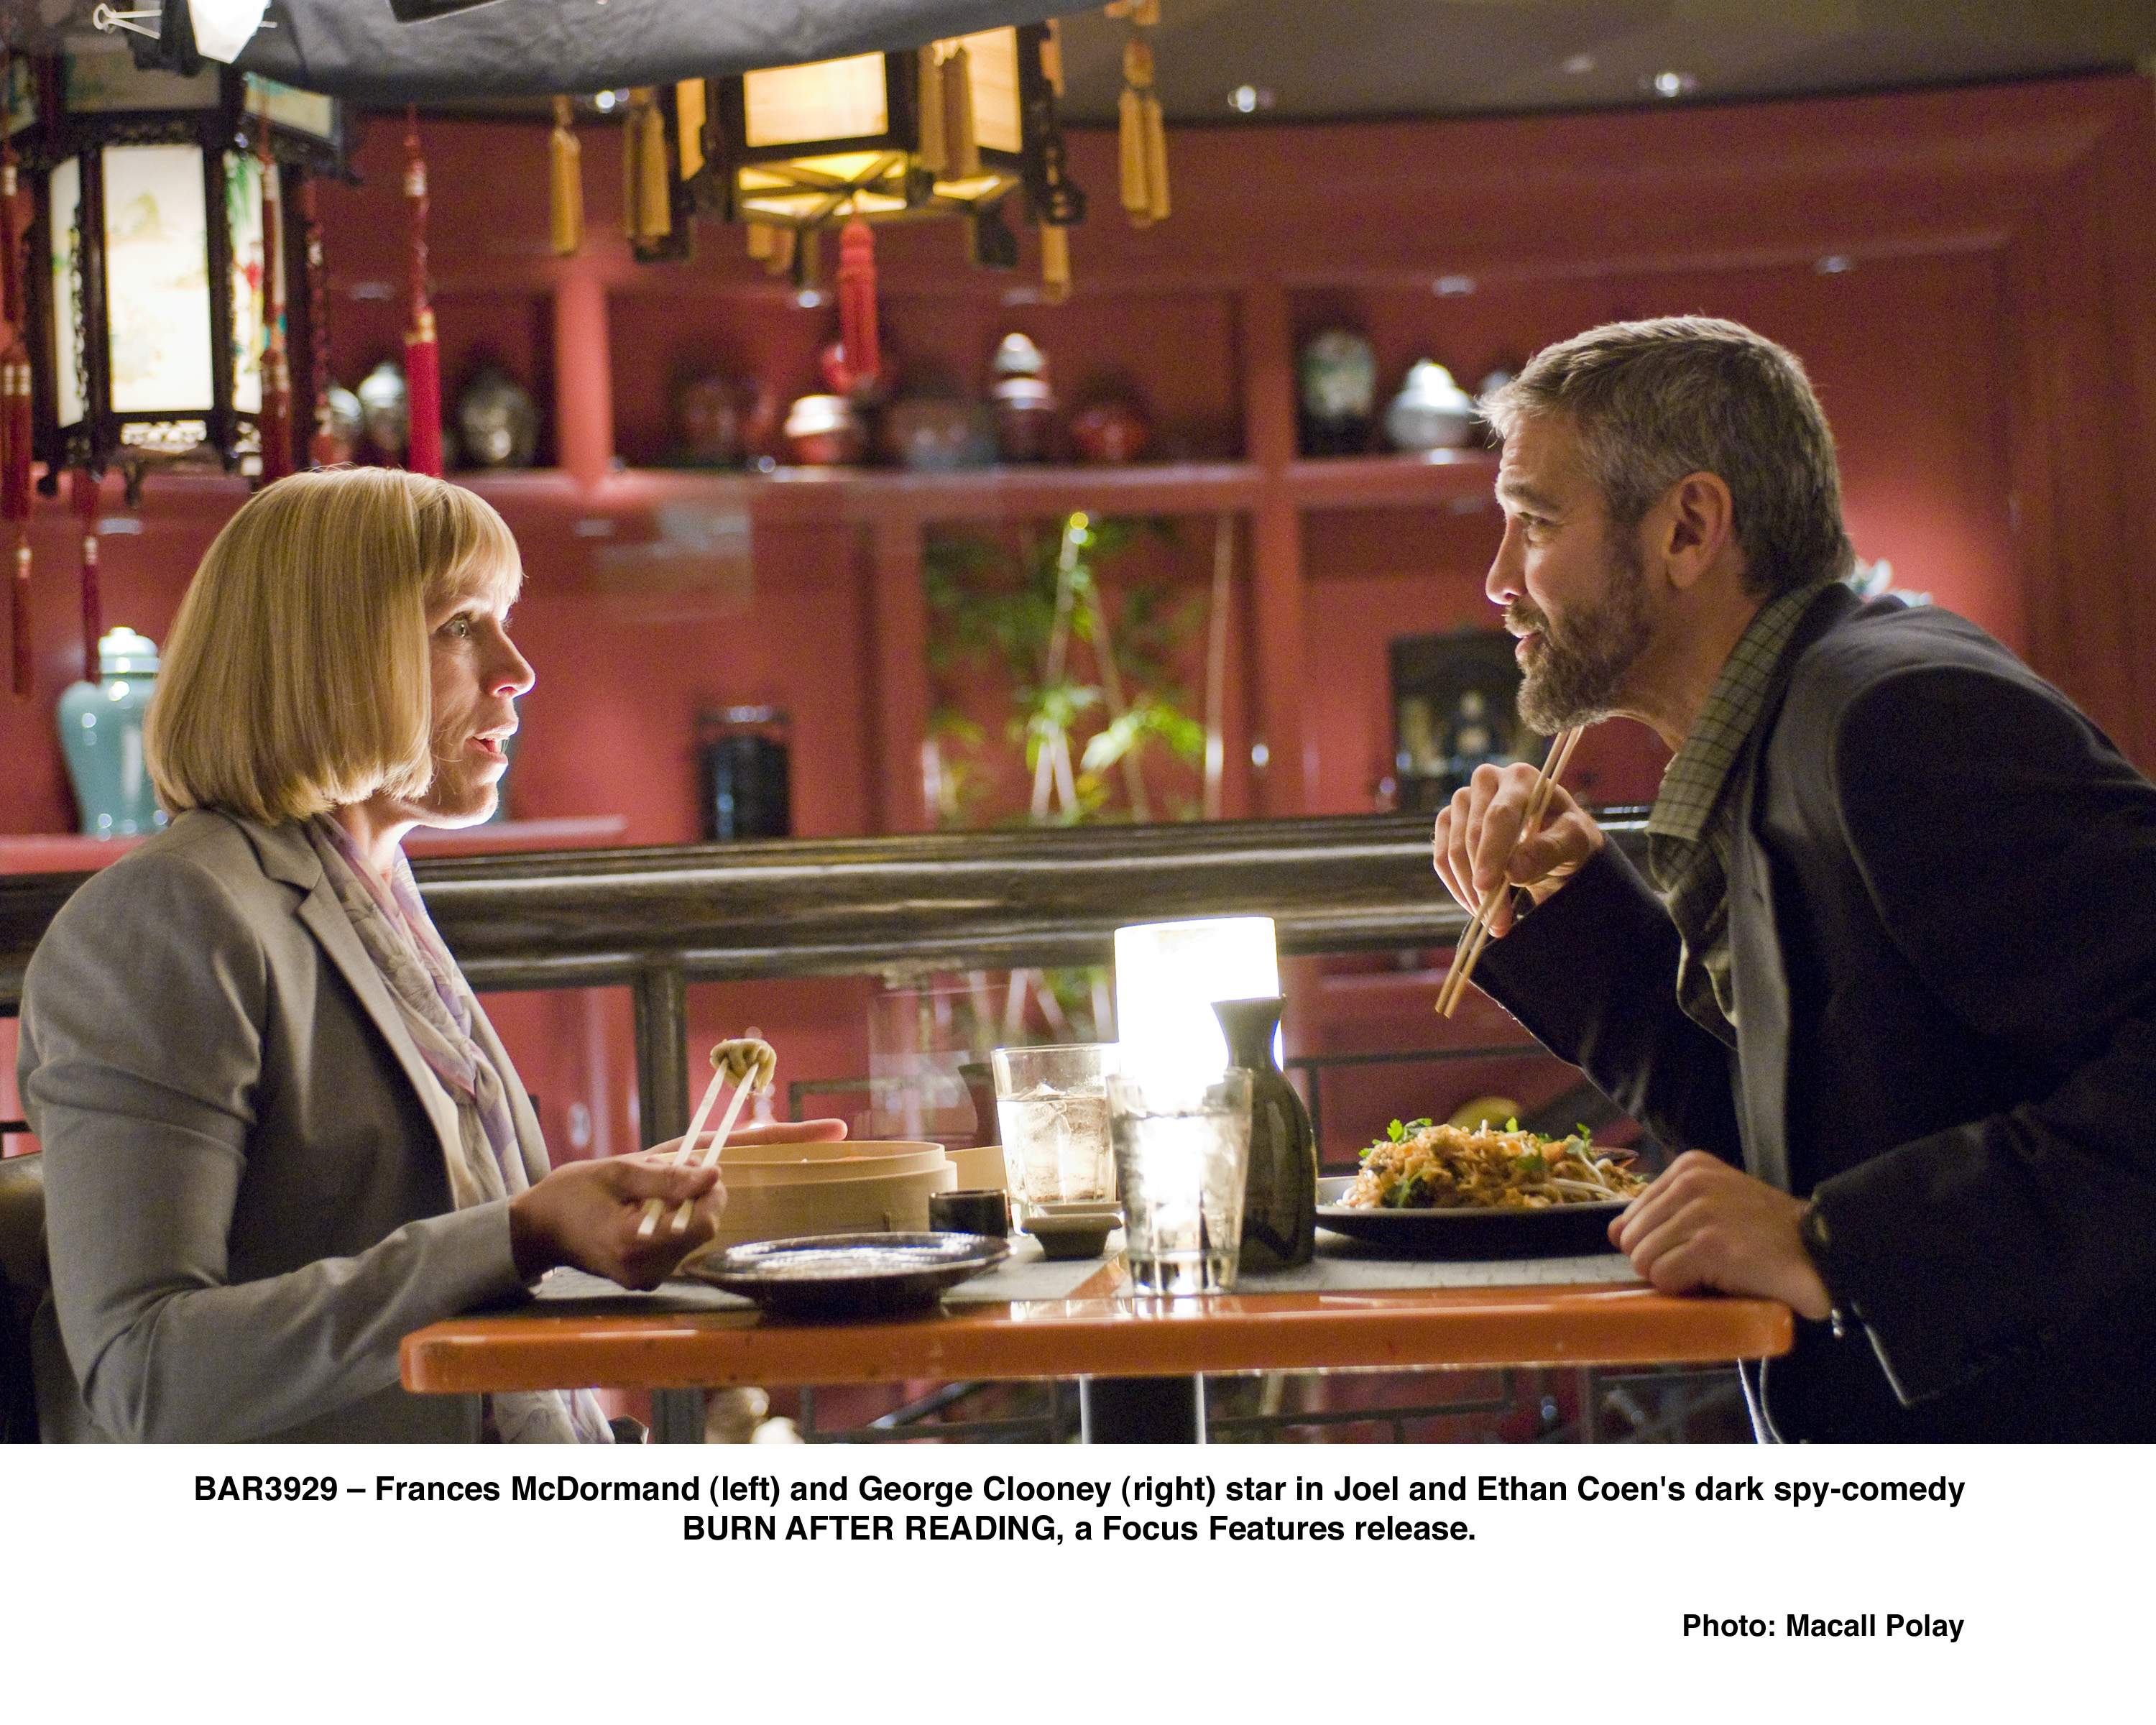 Frances McDormand (left) and George Clooney (right) stars in Joel and Ethan Coen's dark spy-comedy BURN AFTER READING, a Focus Features release.